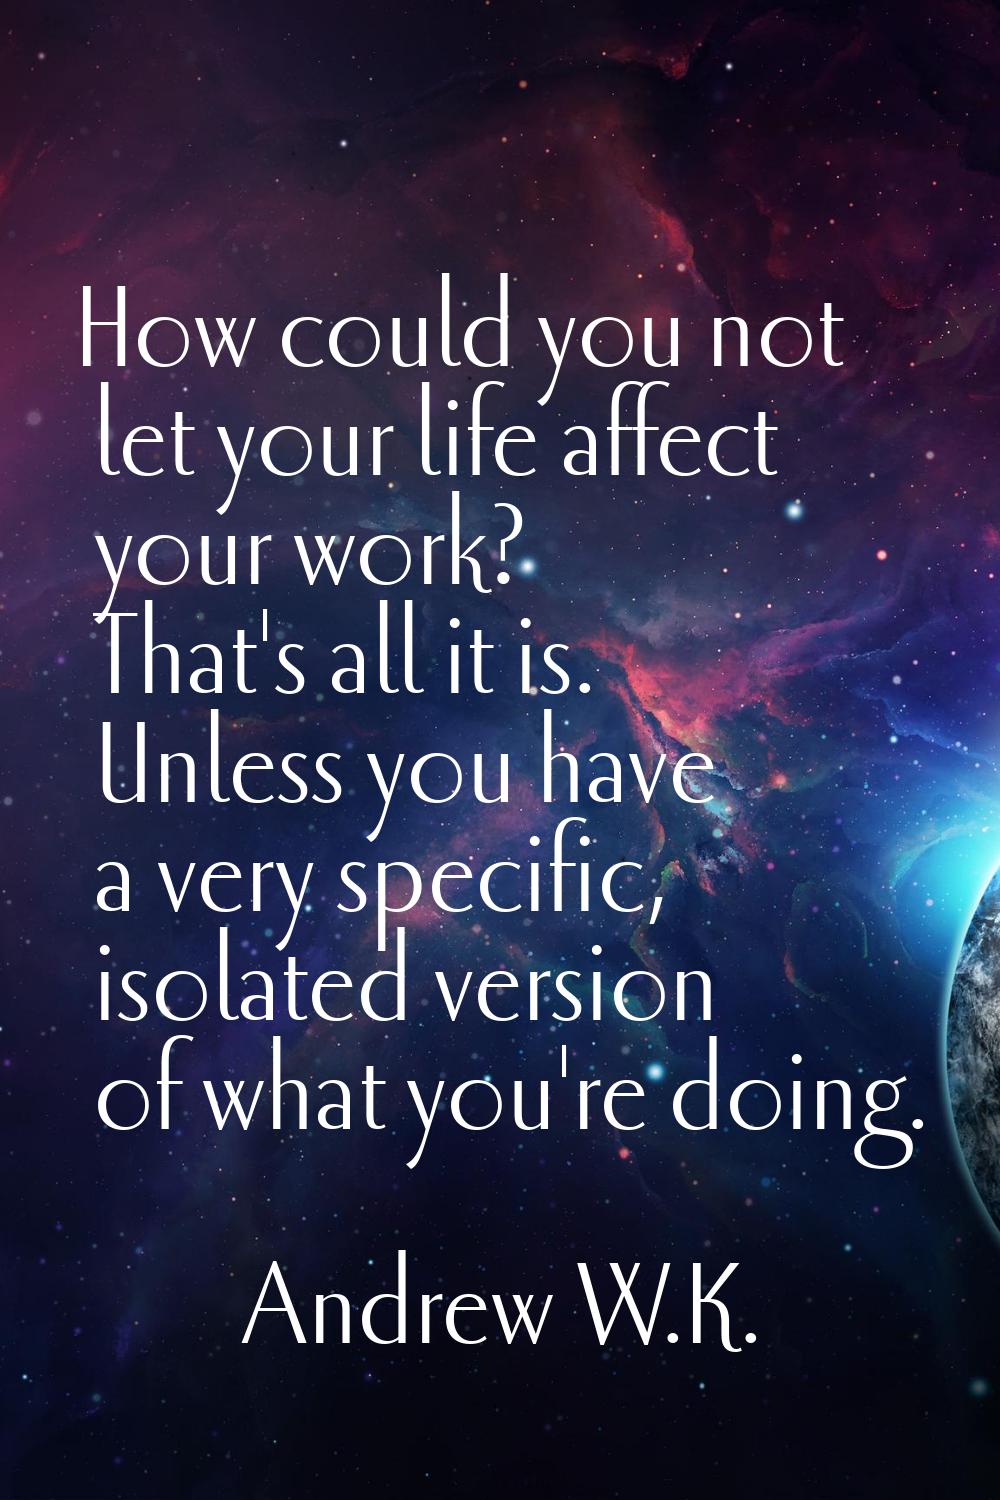 How could you not let your life affect your work? That's all it is. Unless you have a very specific